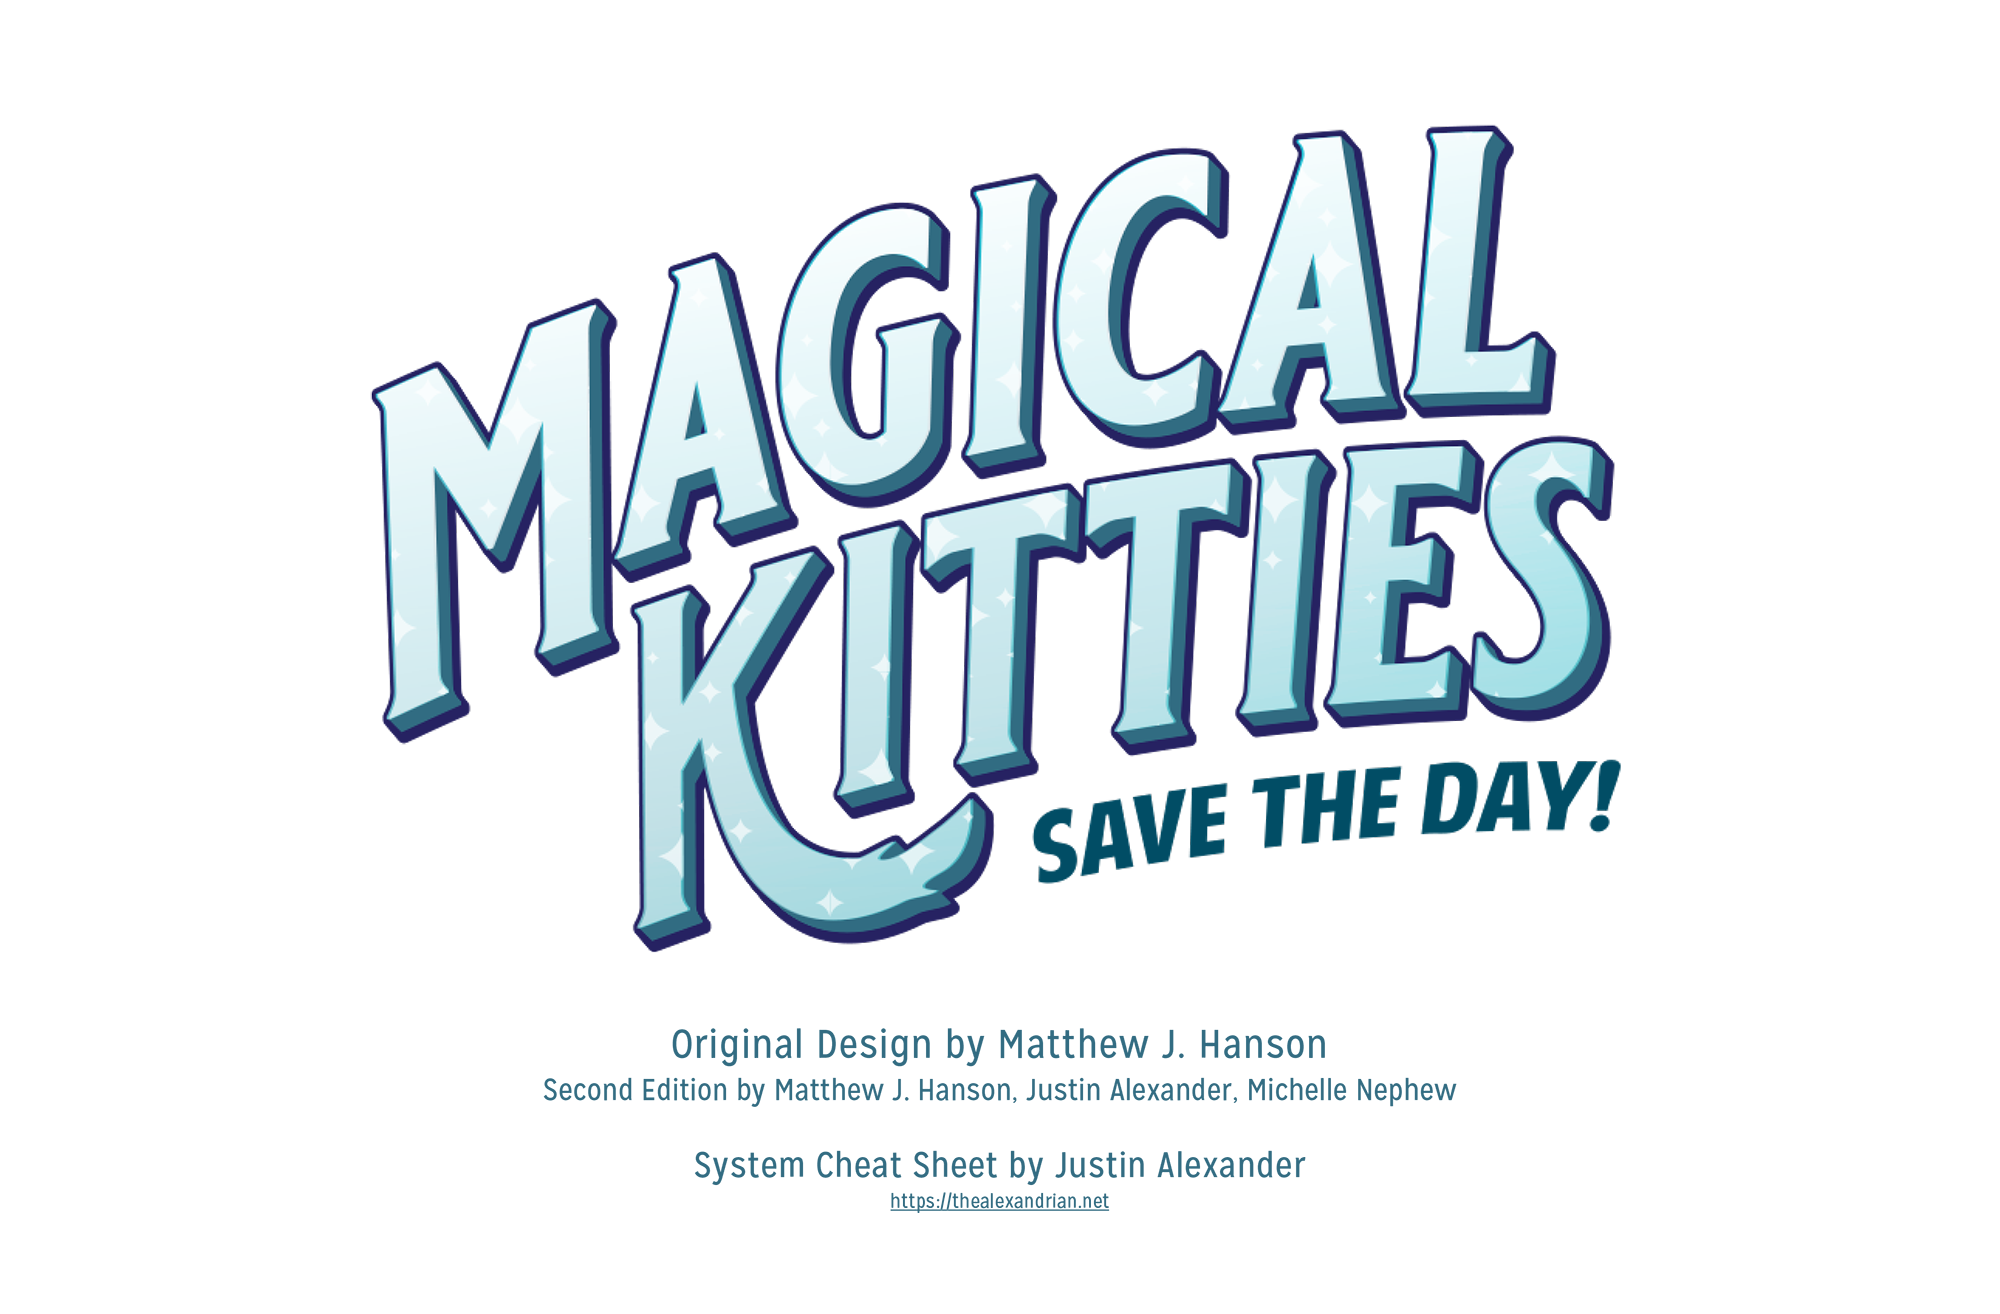 Magical Kitties Save the Day - System Cheat Sheet (PDF)